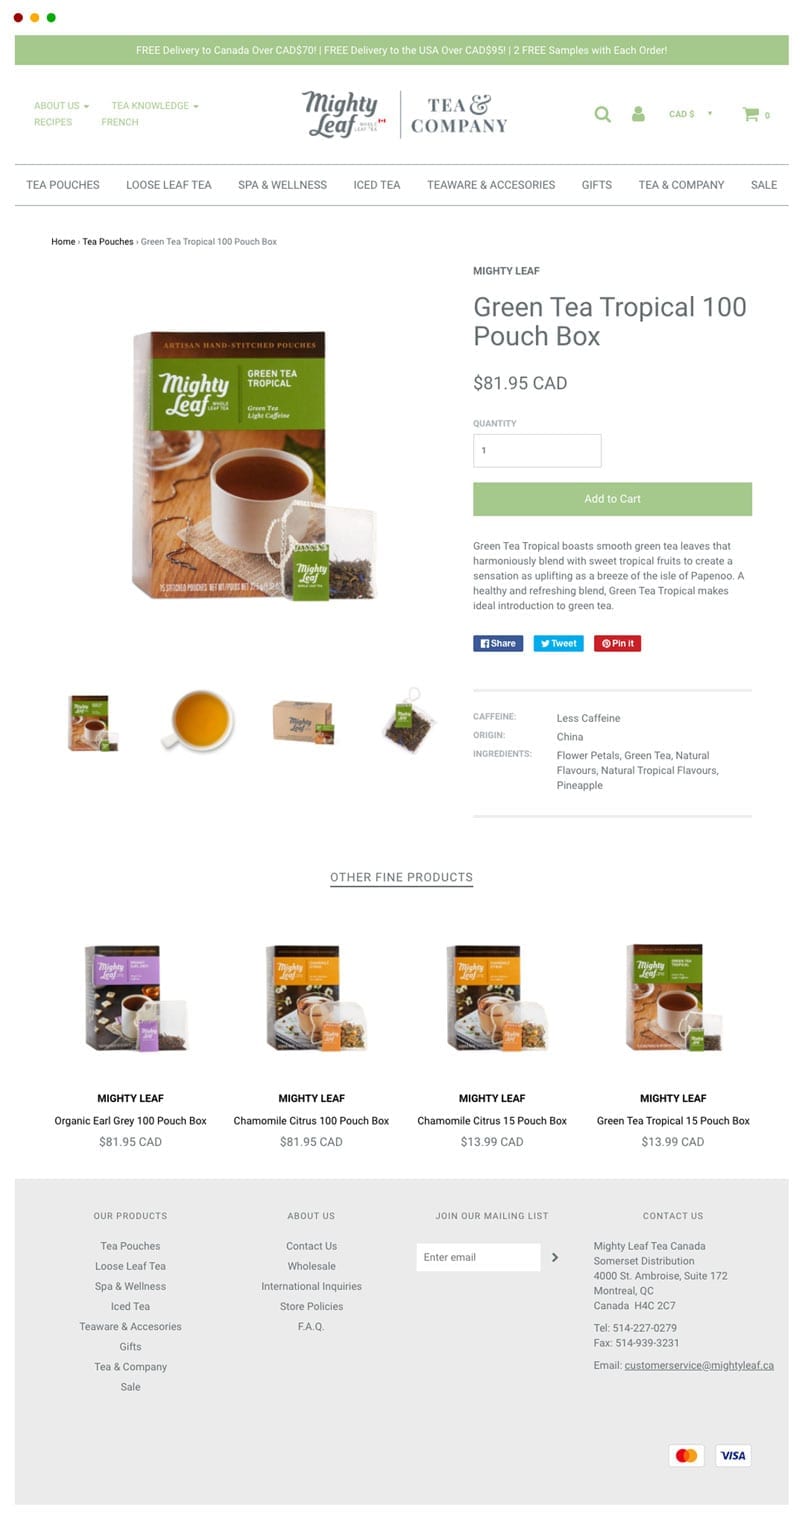 Mighty Leaf Shopify's product page